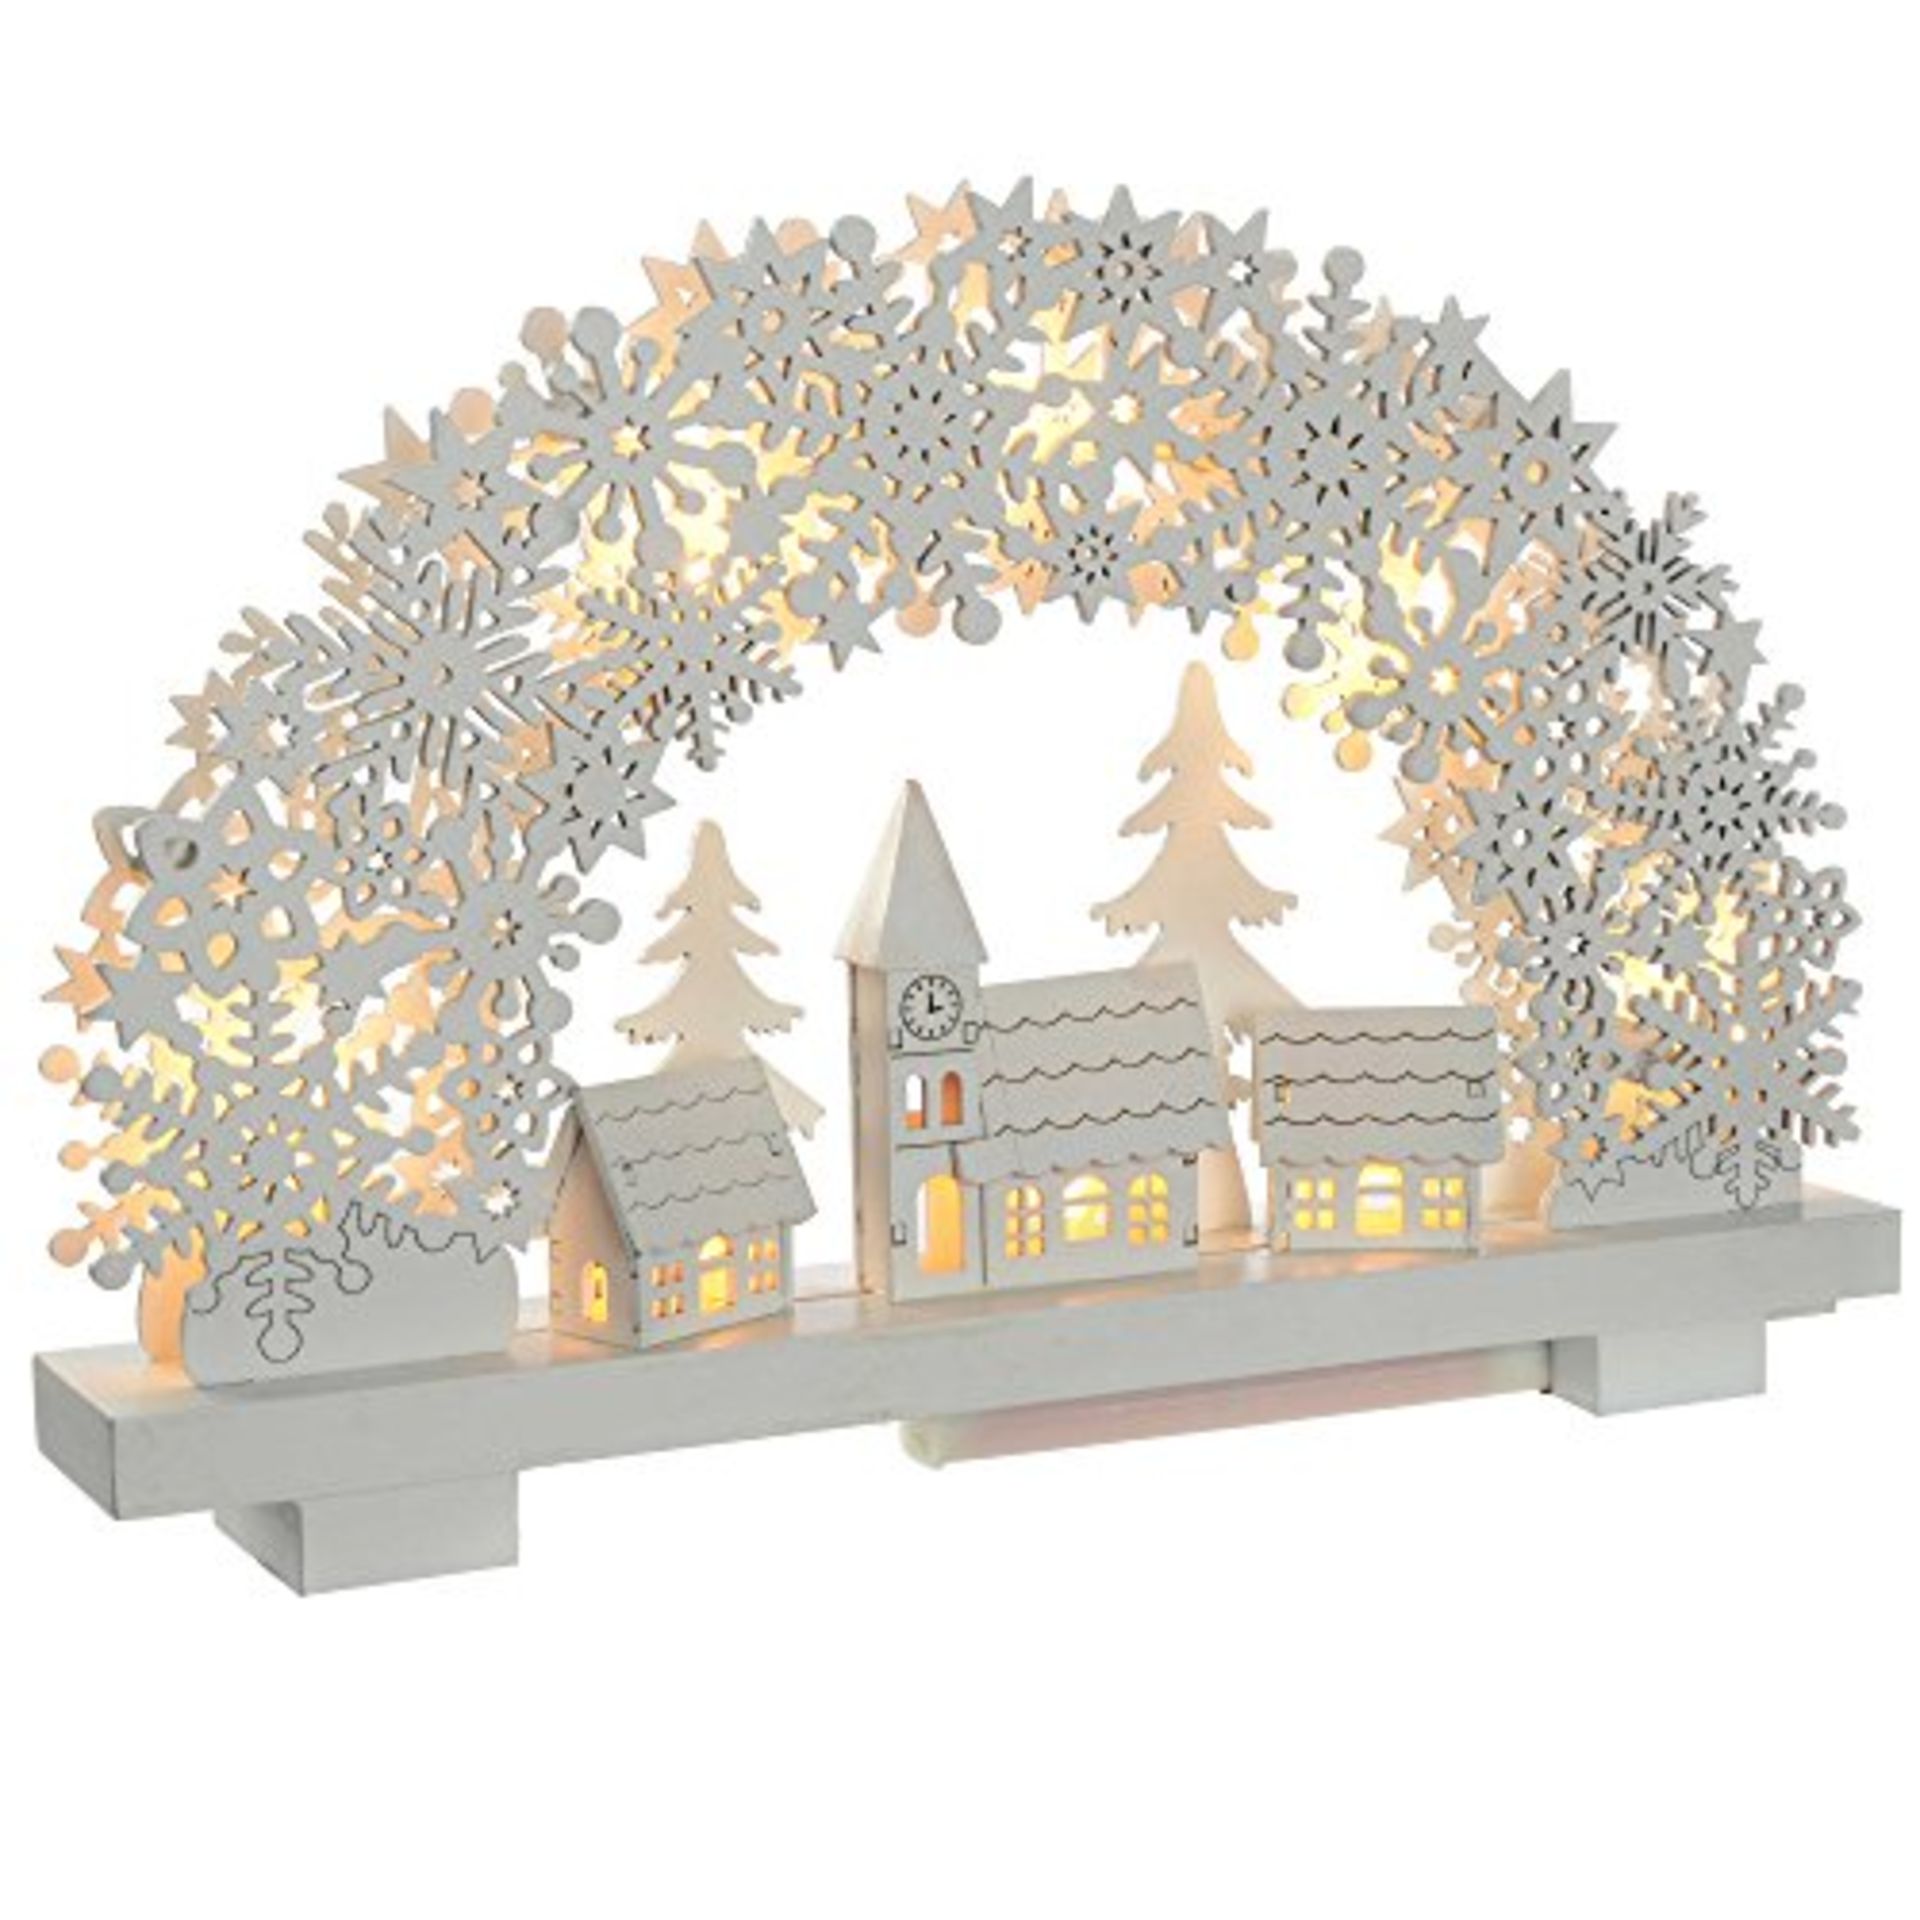 WeRChristmas Pre-Lit Snowflake Arch and Village Scene Christmas Tabletop Decoration, W